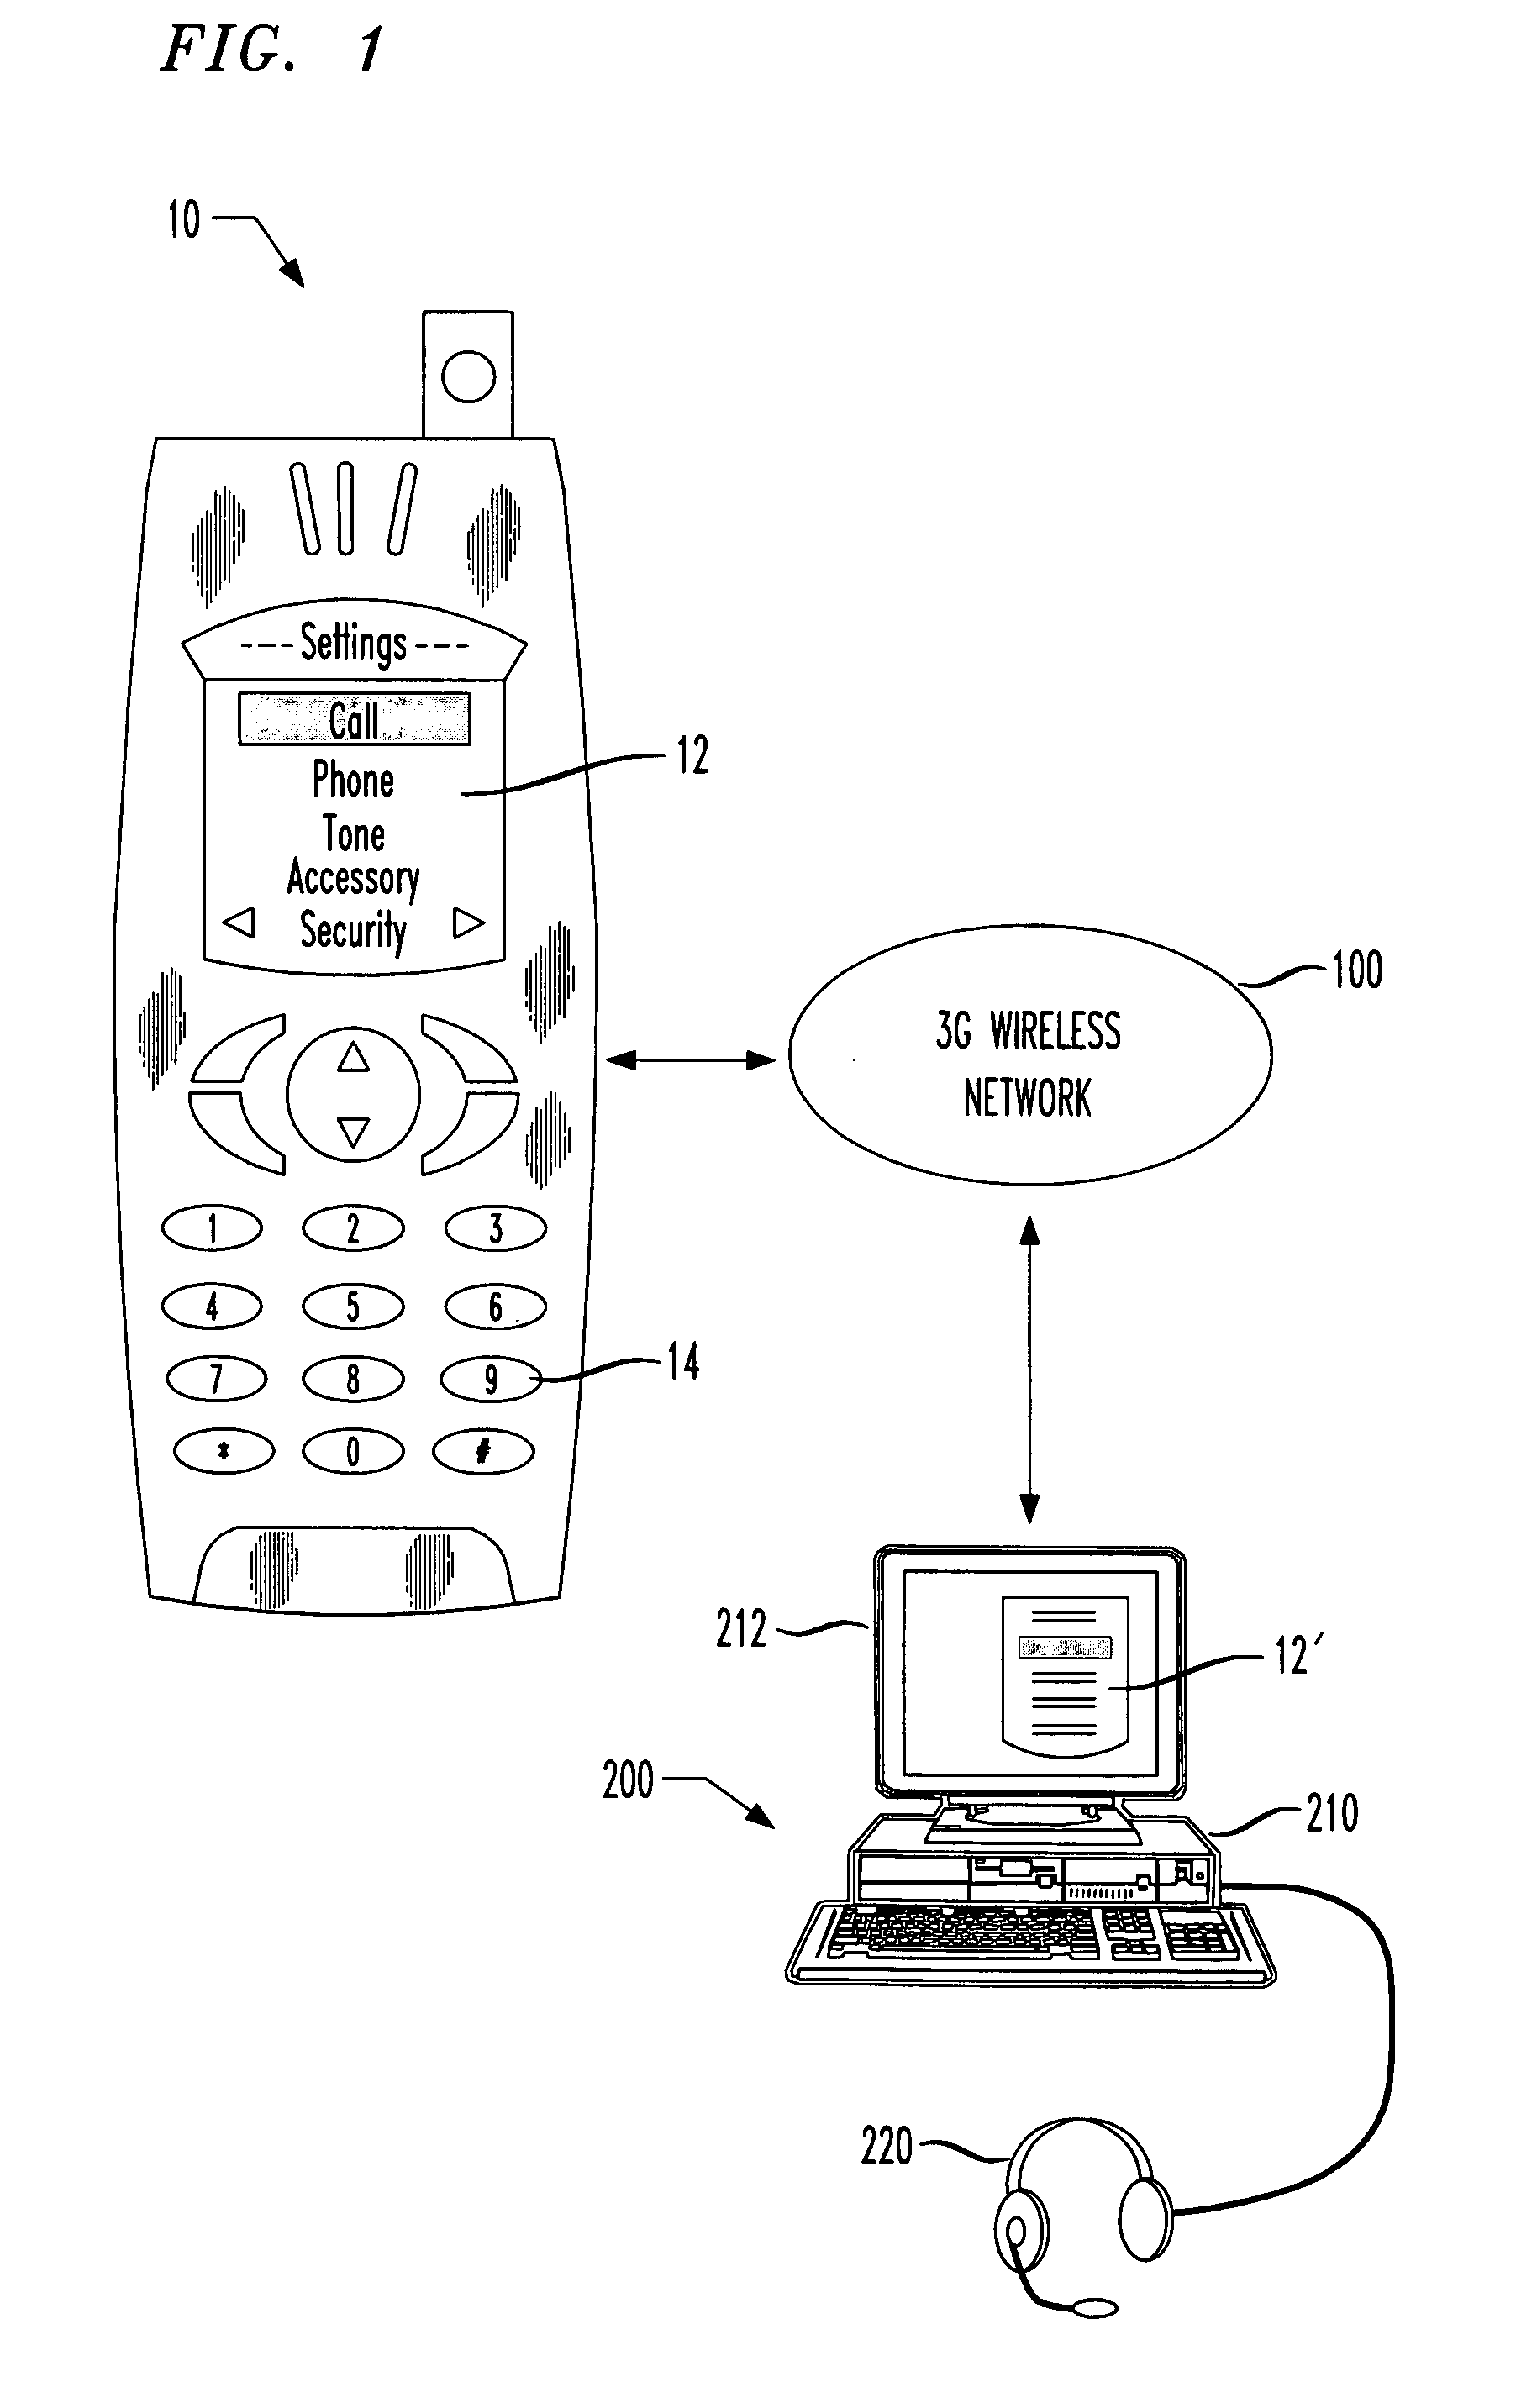 Device and method to enhance call center support for mobile communications devices